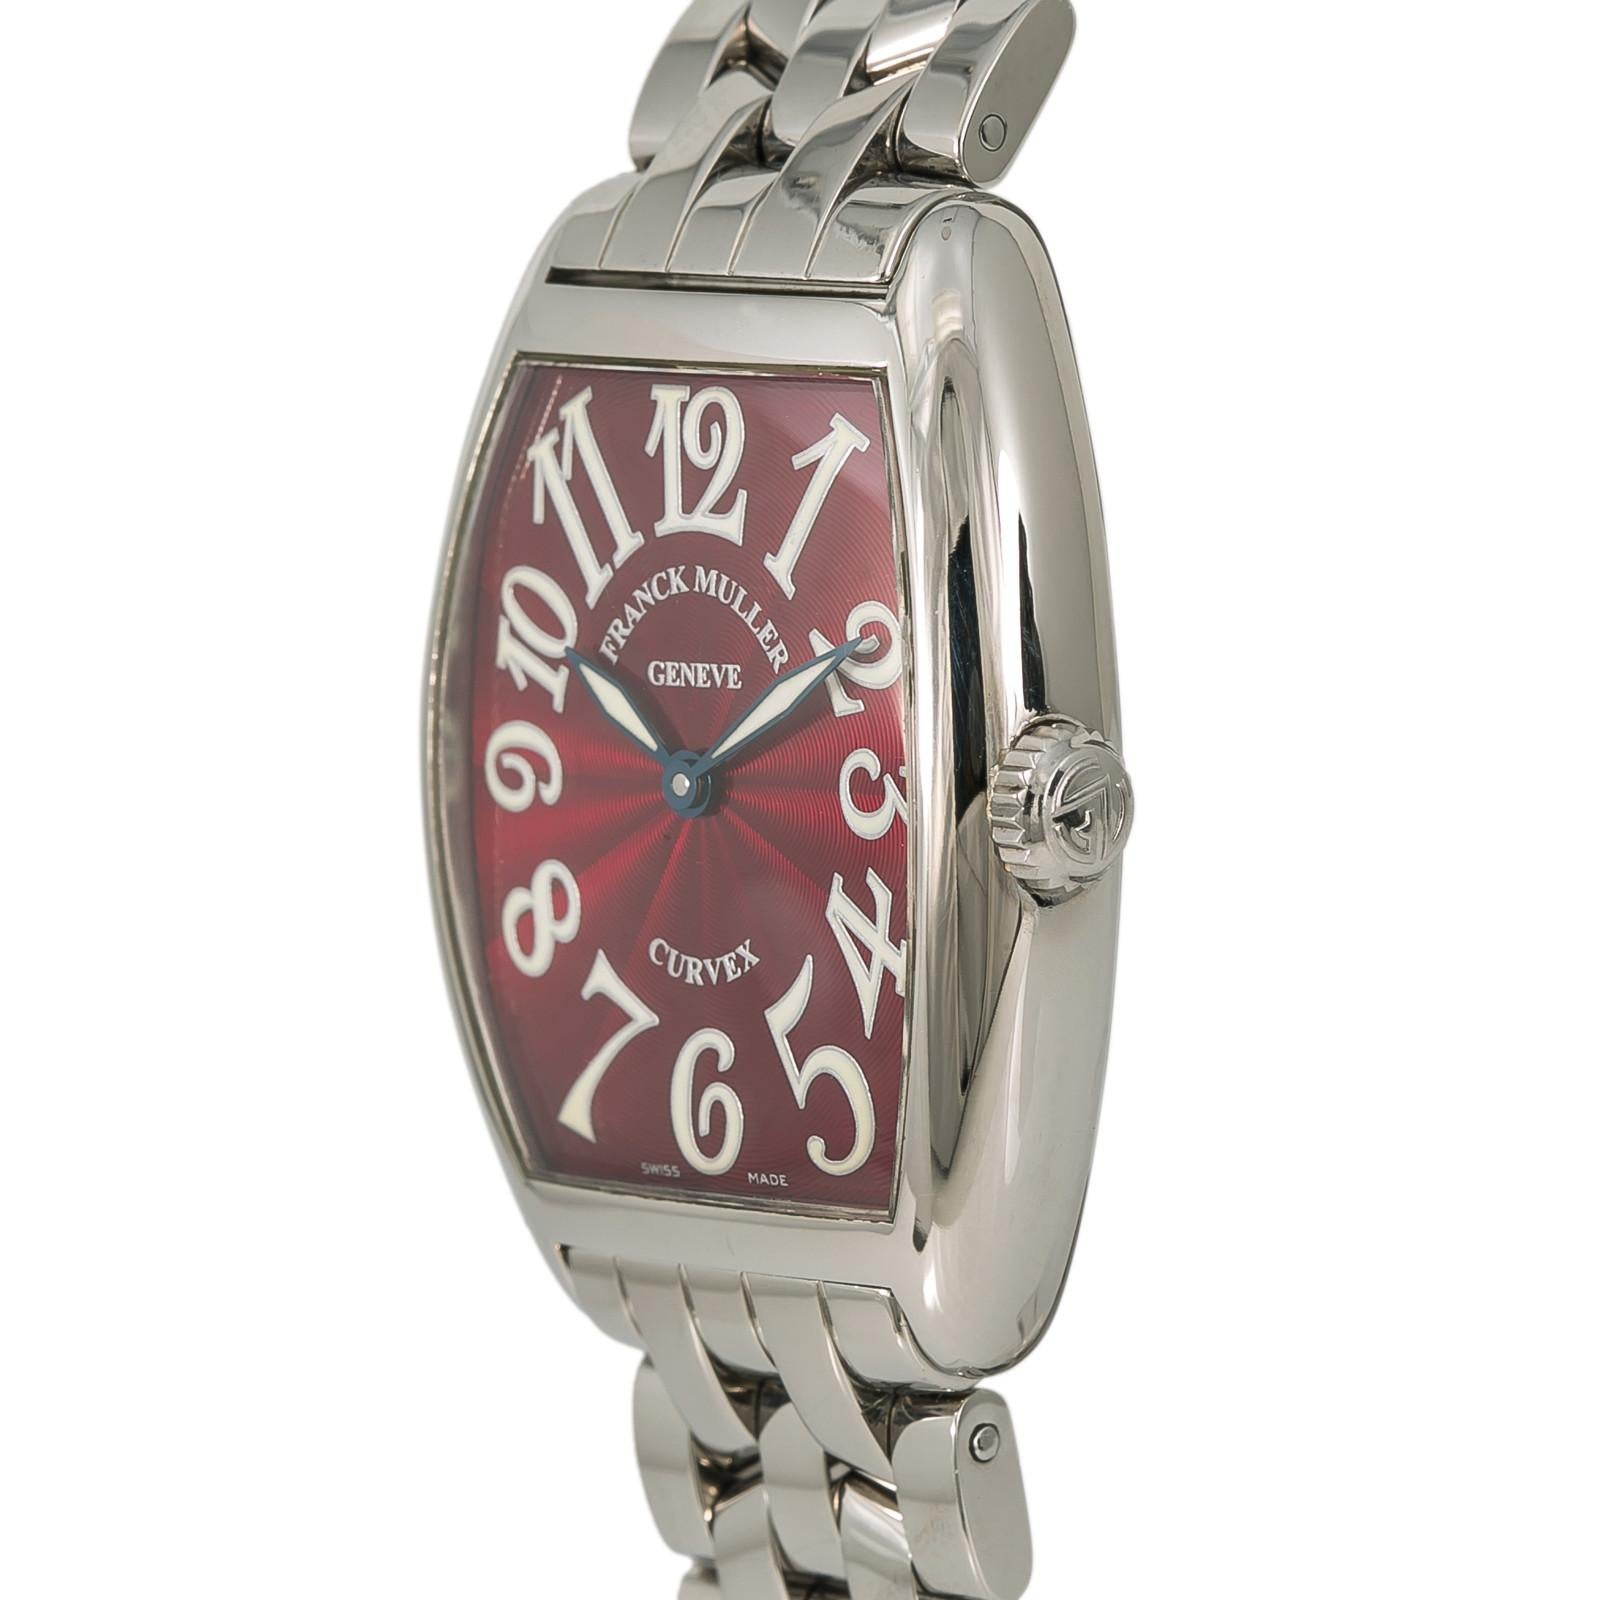 Contemporary Franck Muller Cintree Curvex 7502 QZ, Case, Certified and Warranty For Sale